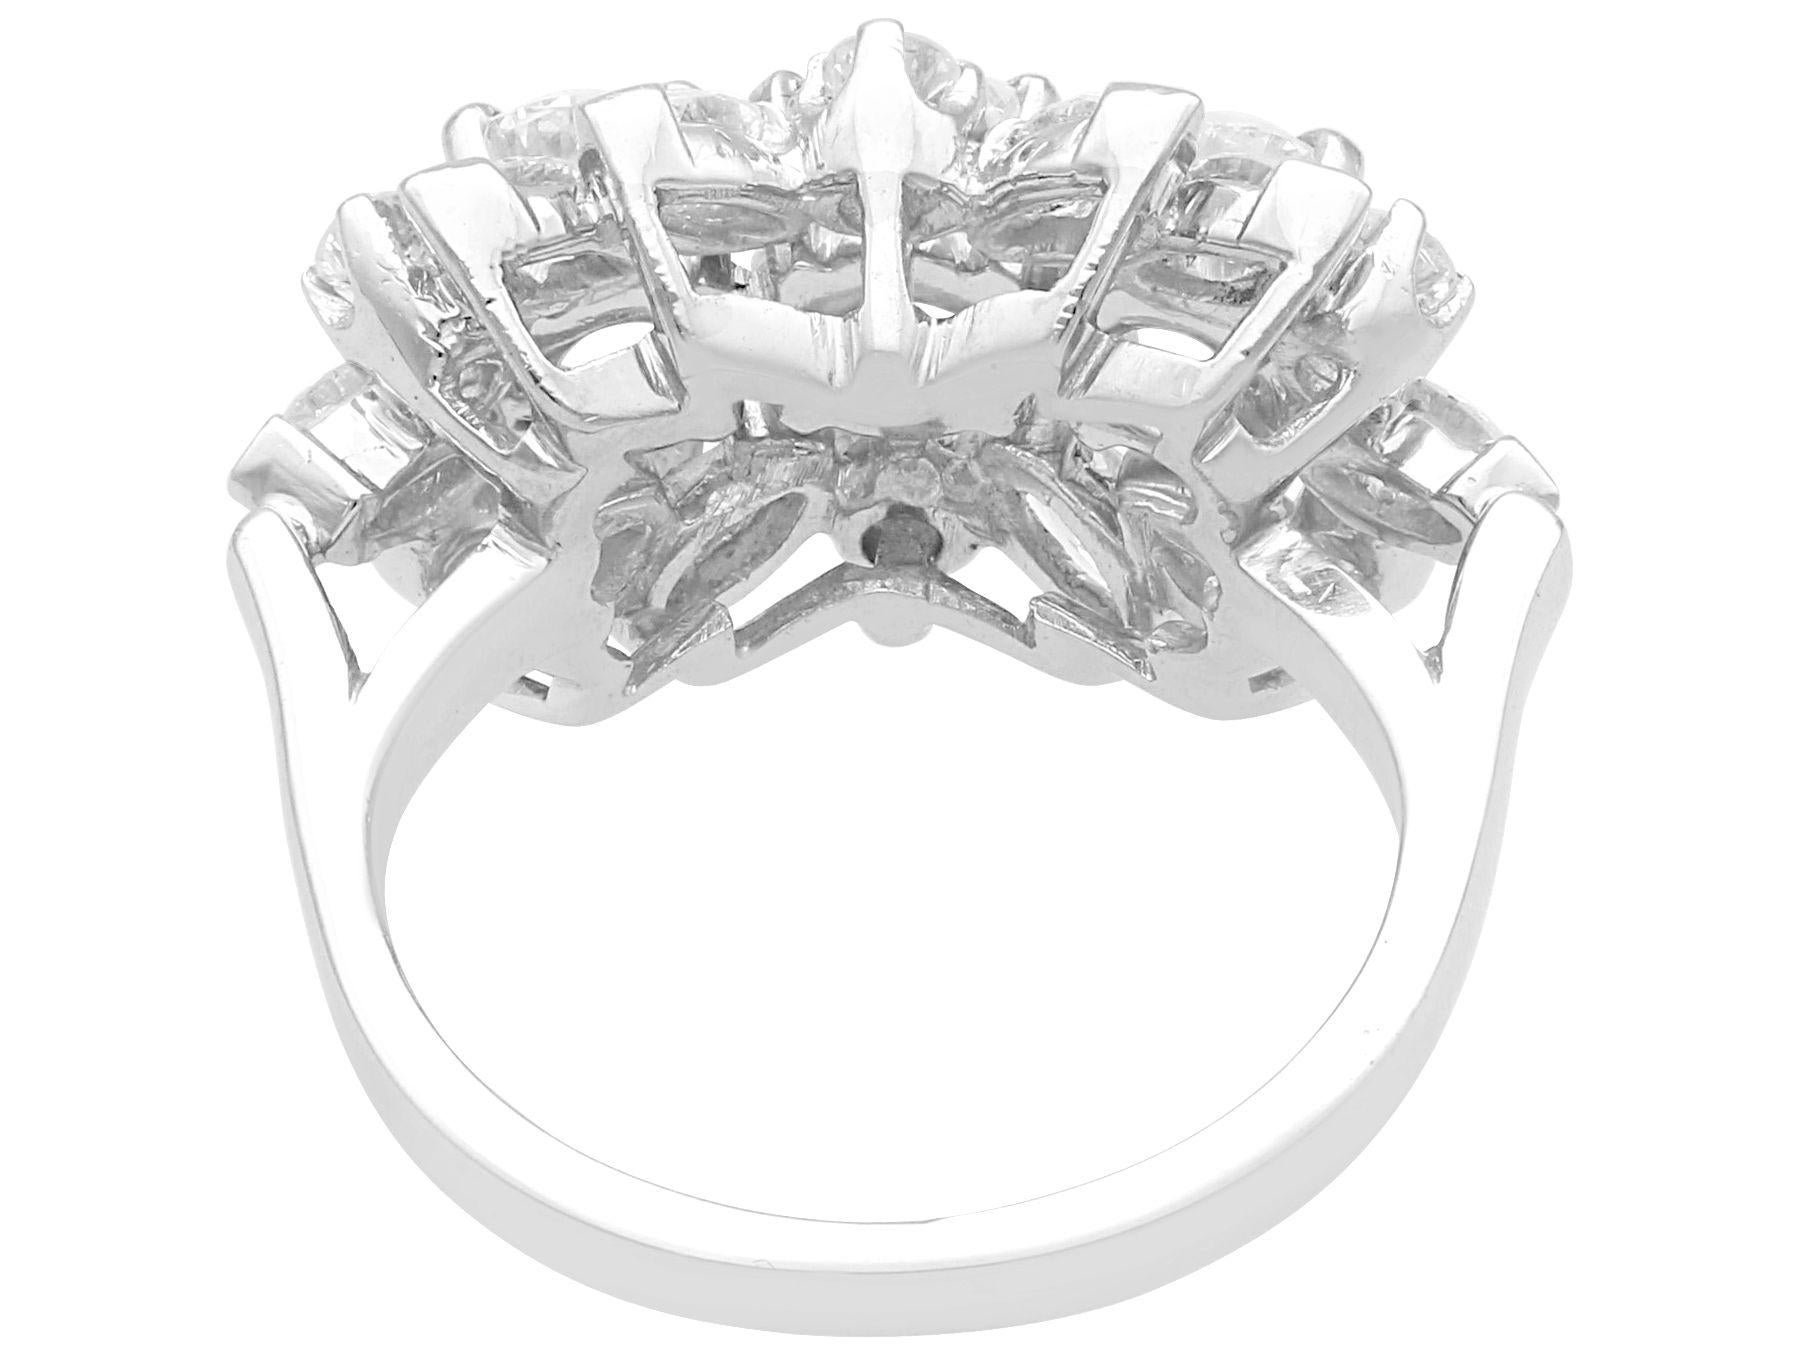 Women's or Men's Vintage 3.03 Carat Diamond and Platinum Cocktail Ring For Sale